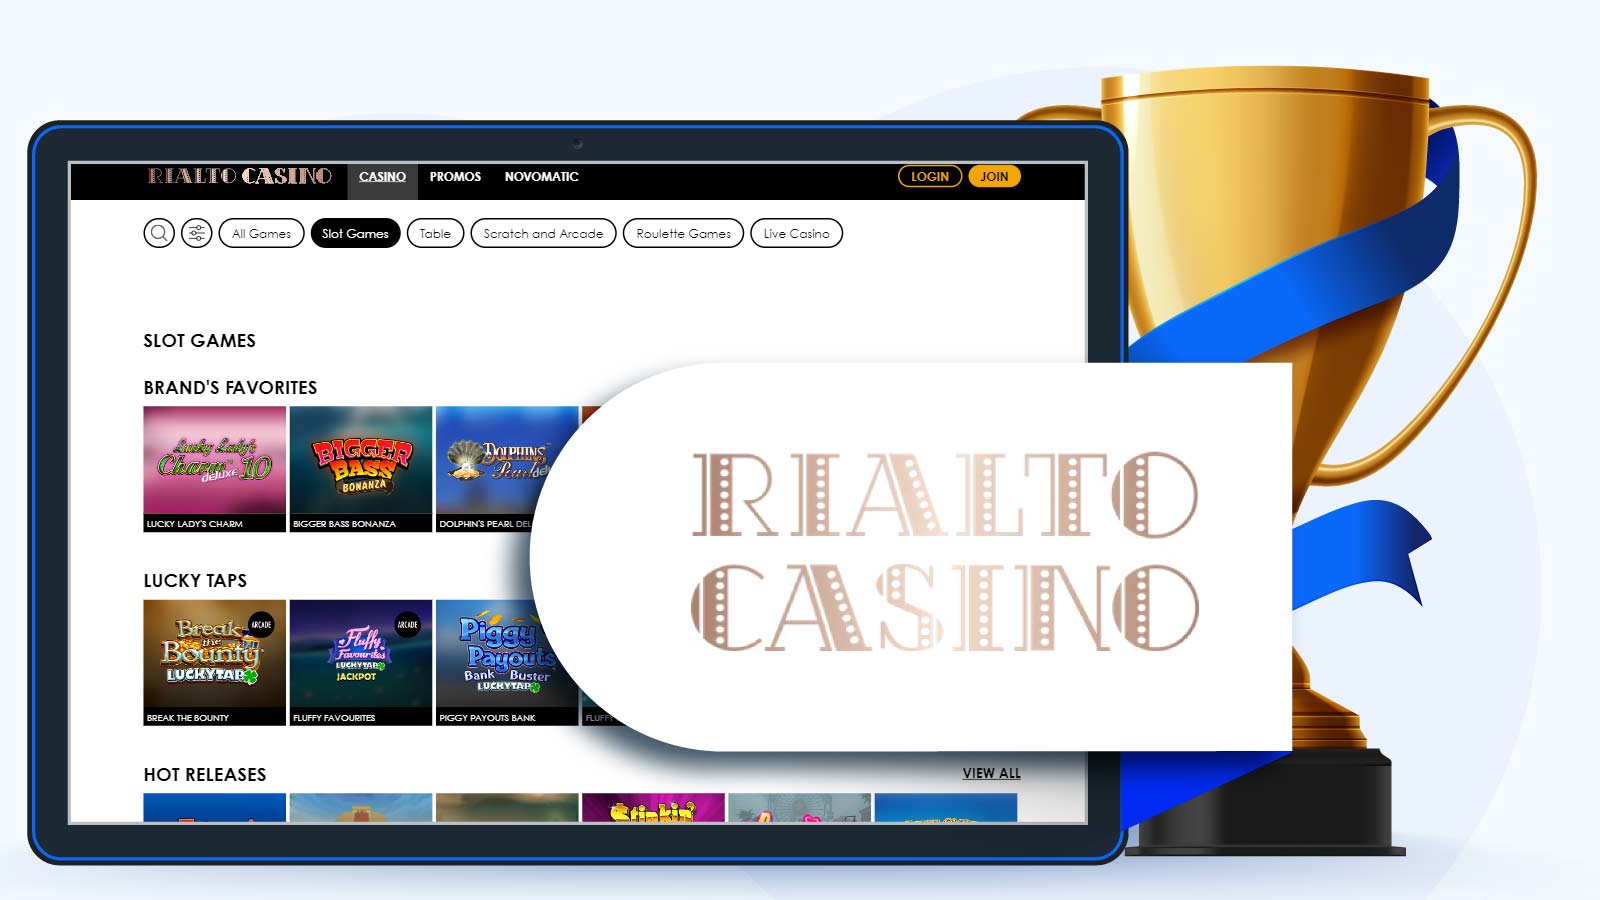 Rialto Casino – Best Low Wager Casino for Extra Spins